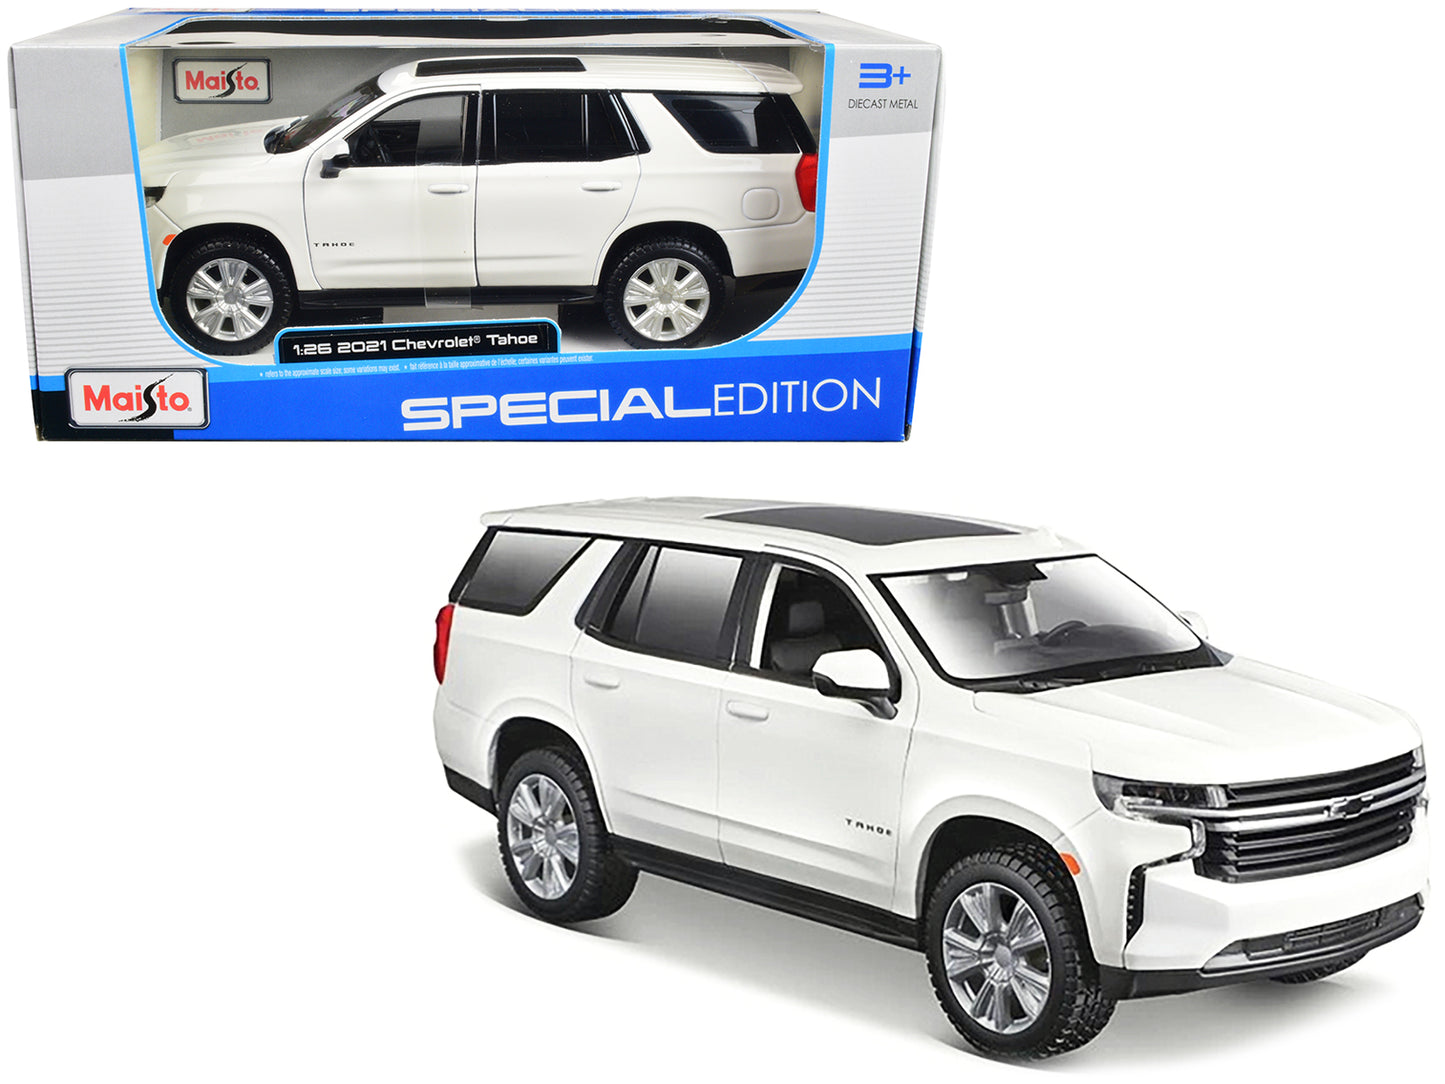 2021 Chevrolet Tahoe White with Sunroof "Special Edition" 1/26 Diecast Model Car by Maisto